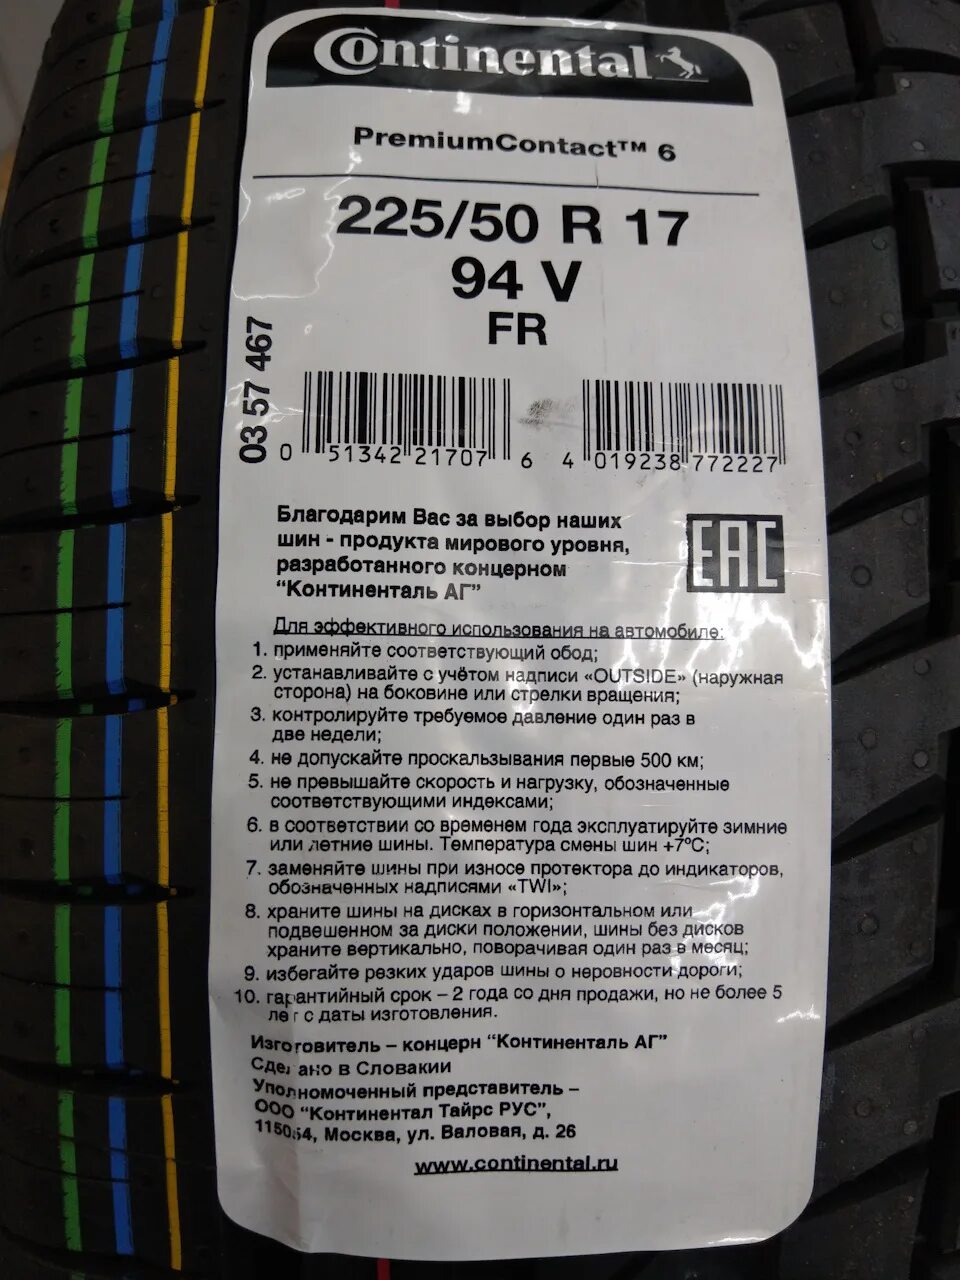 Continental COMFORTCONTACT 6 225/50 r17. Резина Continental Premium contact 6. Continental чек резина r17. Резина Континенталь 225 50 r17.